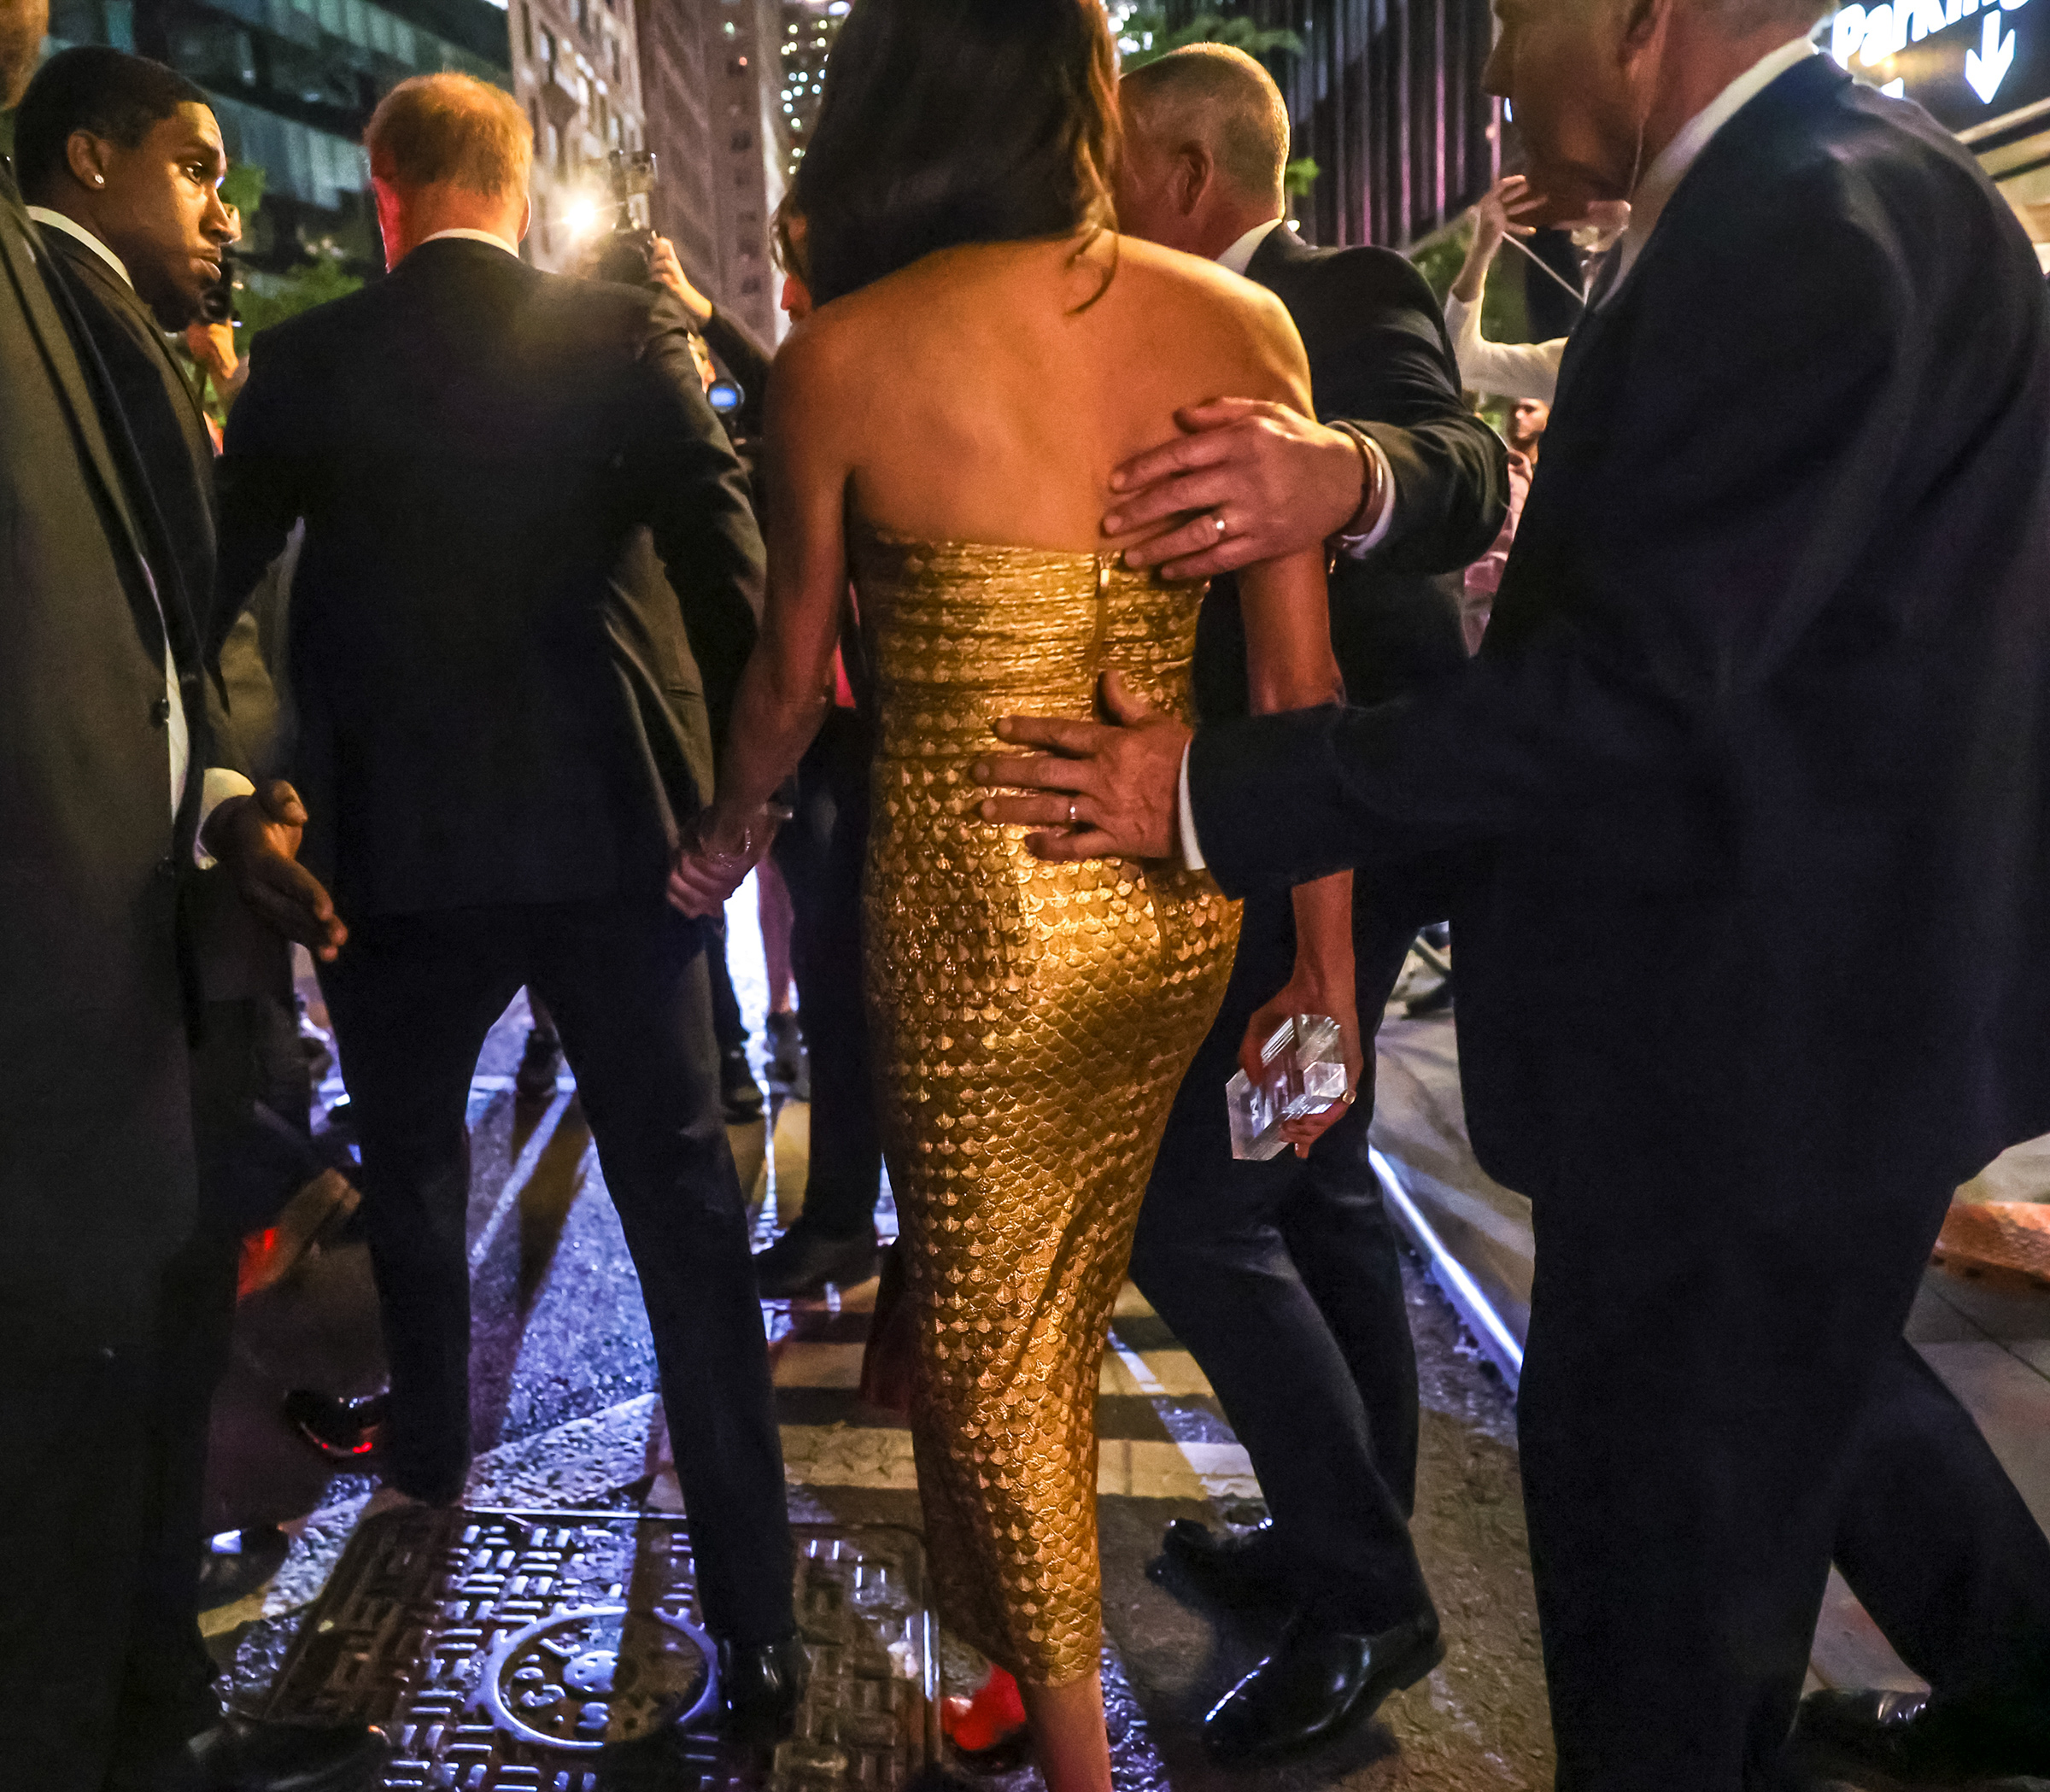 Meghan Markle and Prince Harry leave the Ms. Foundation Women of Vision Awards at Ziegfeld Ballroom on May 16 in New York City. (Selcuk Acar—Anadolu Agency/Getty Images)